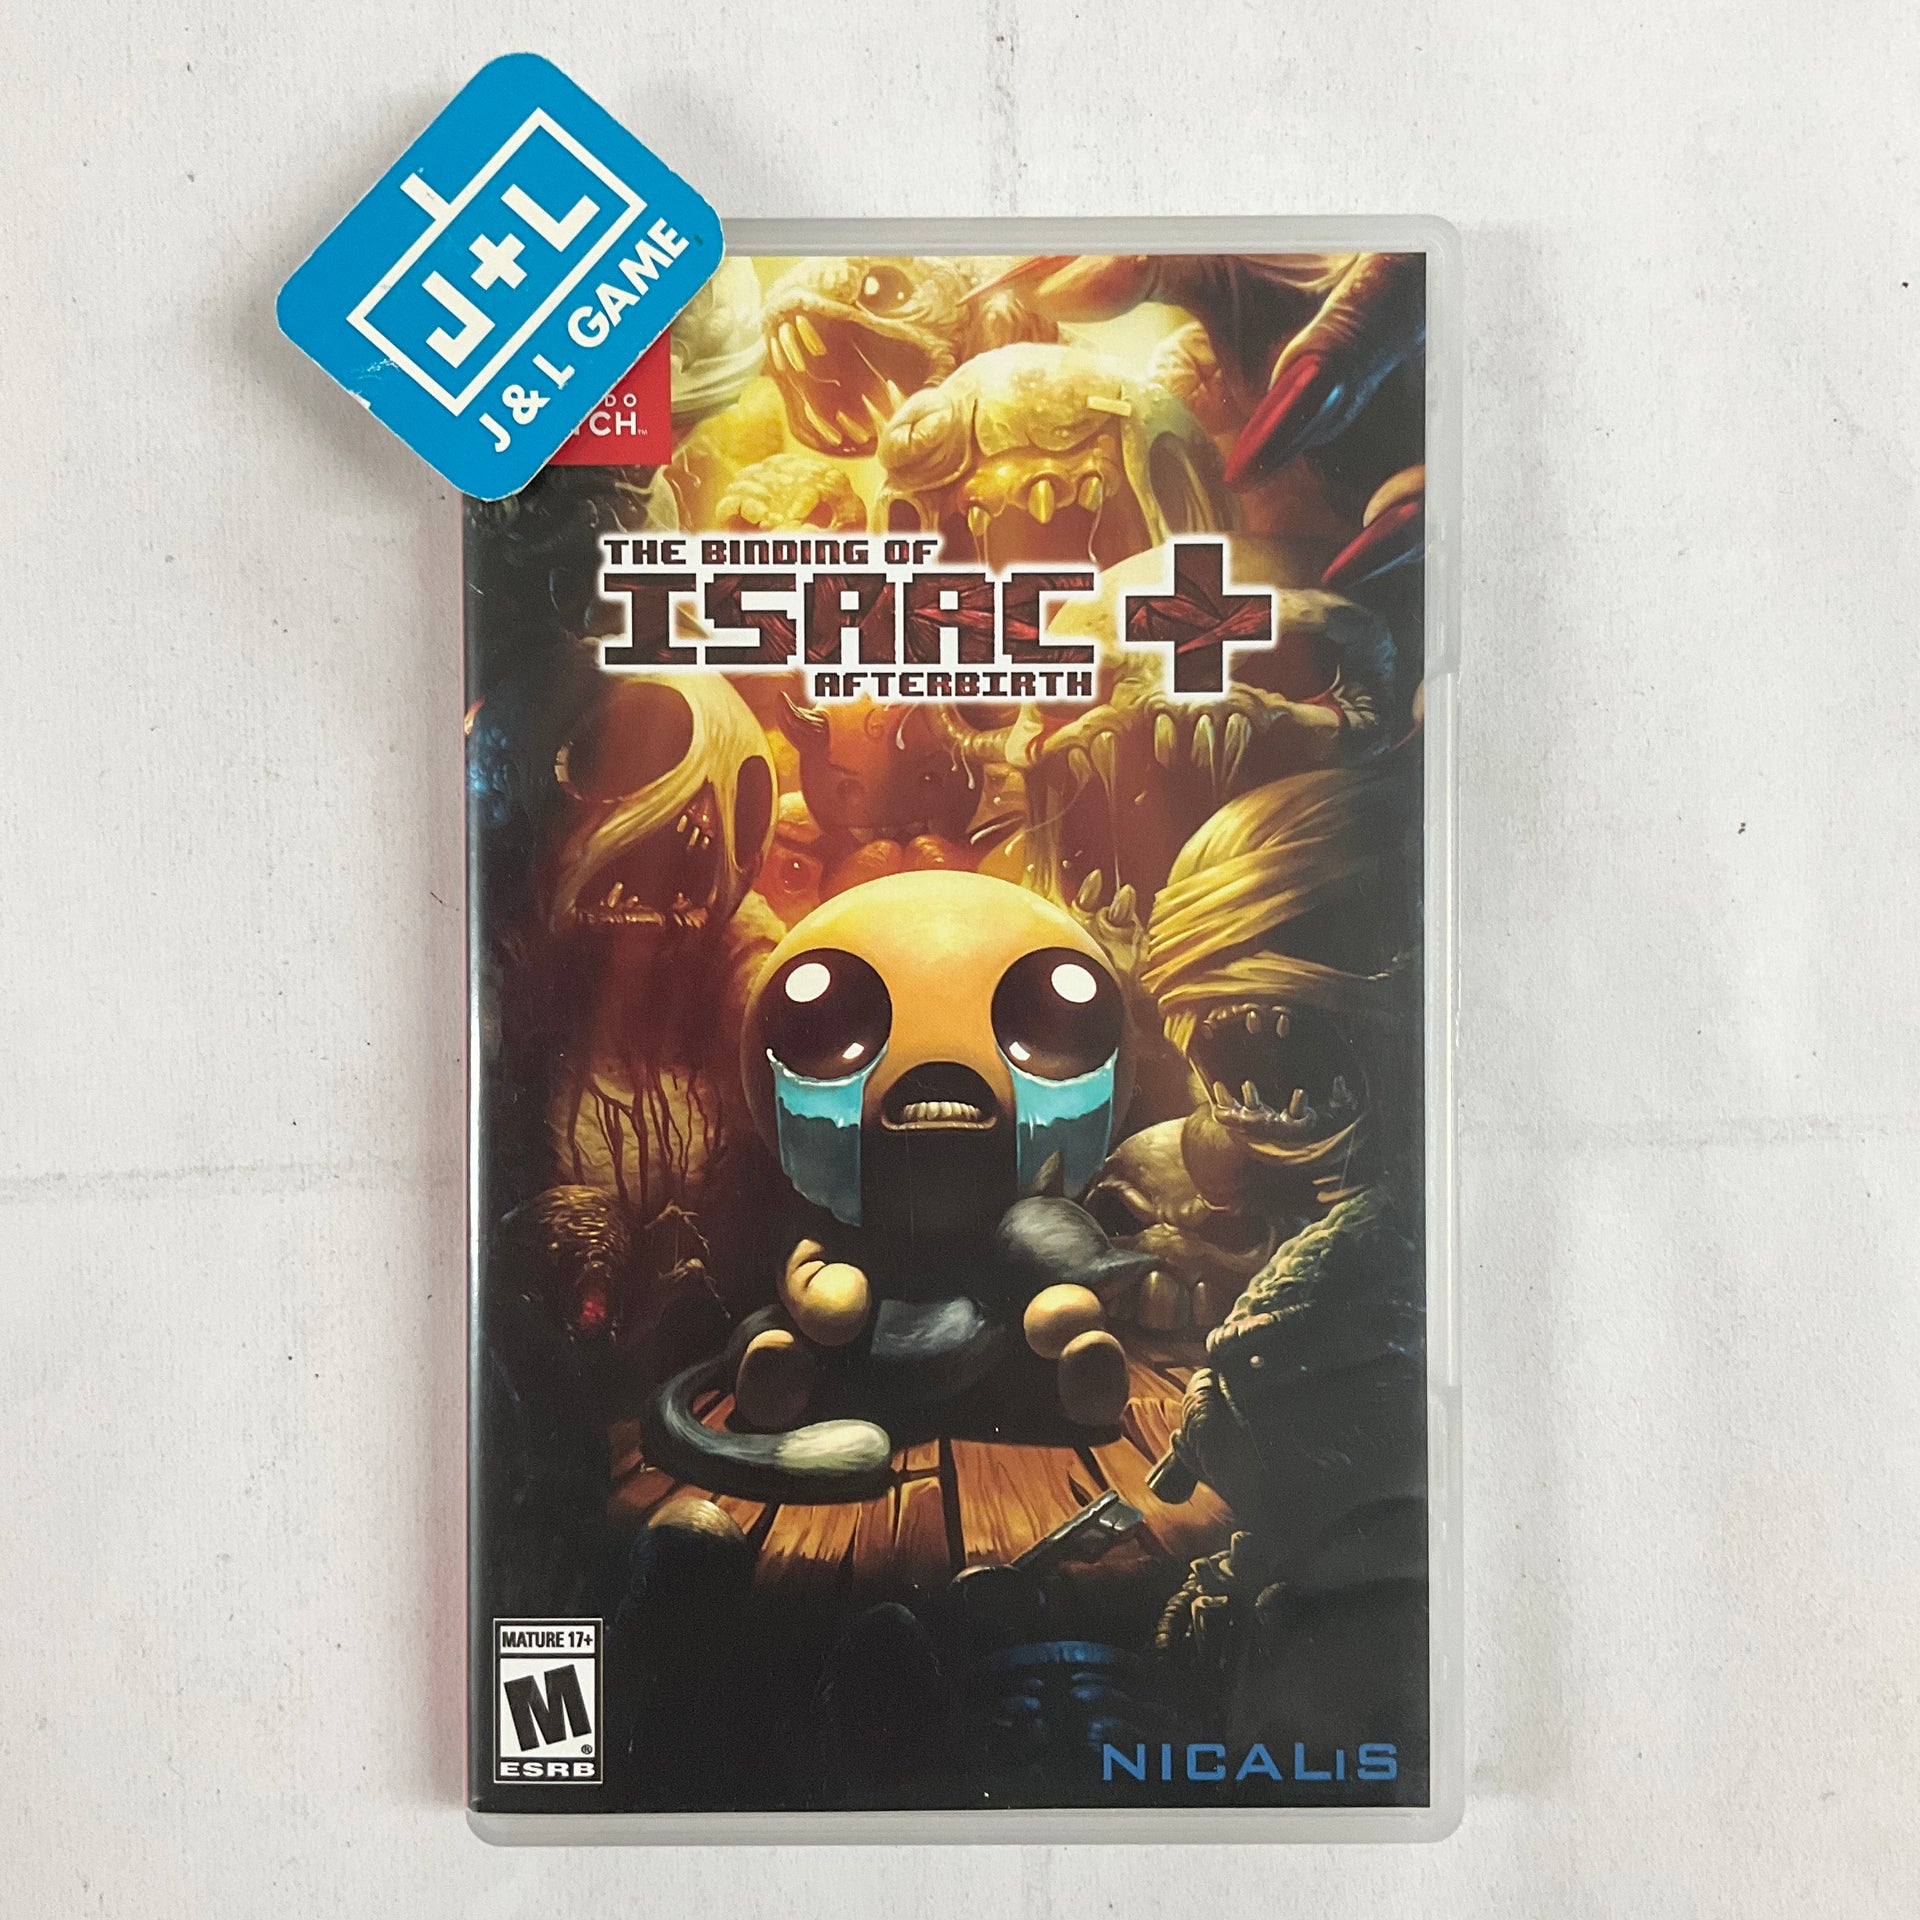 The Binding of Isaac: Afterbirth + - (NSW) Nintendo Switch [Pre